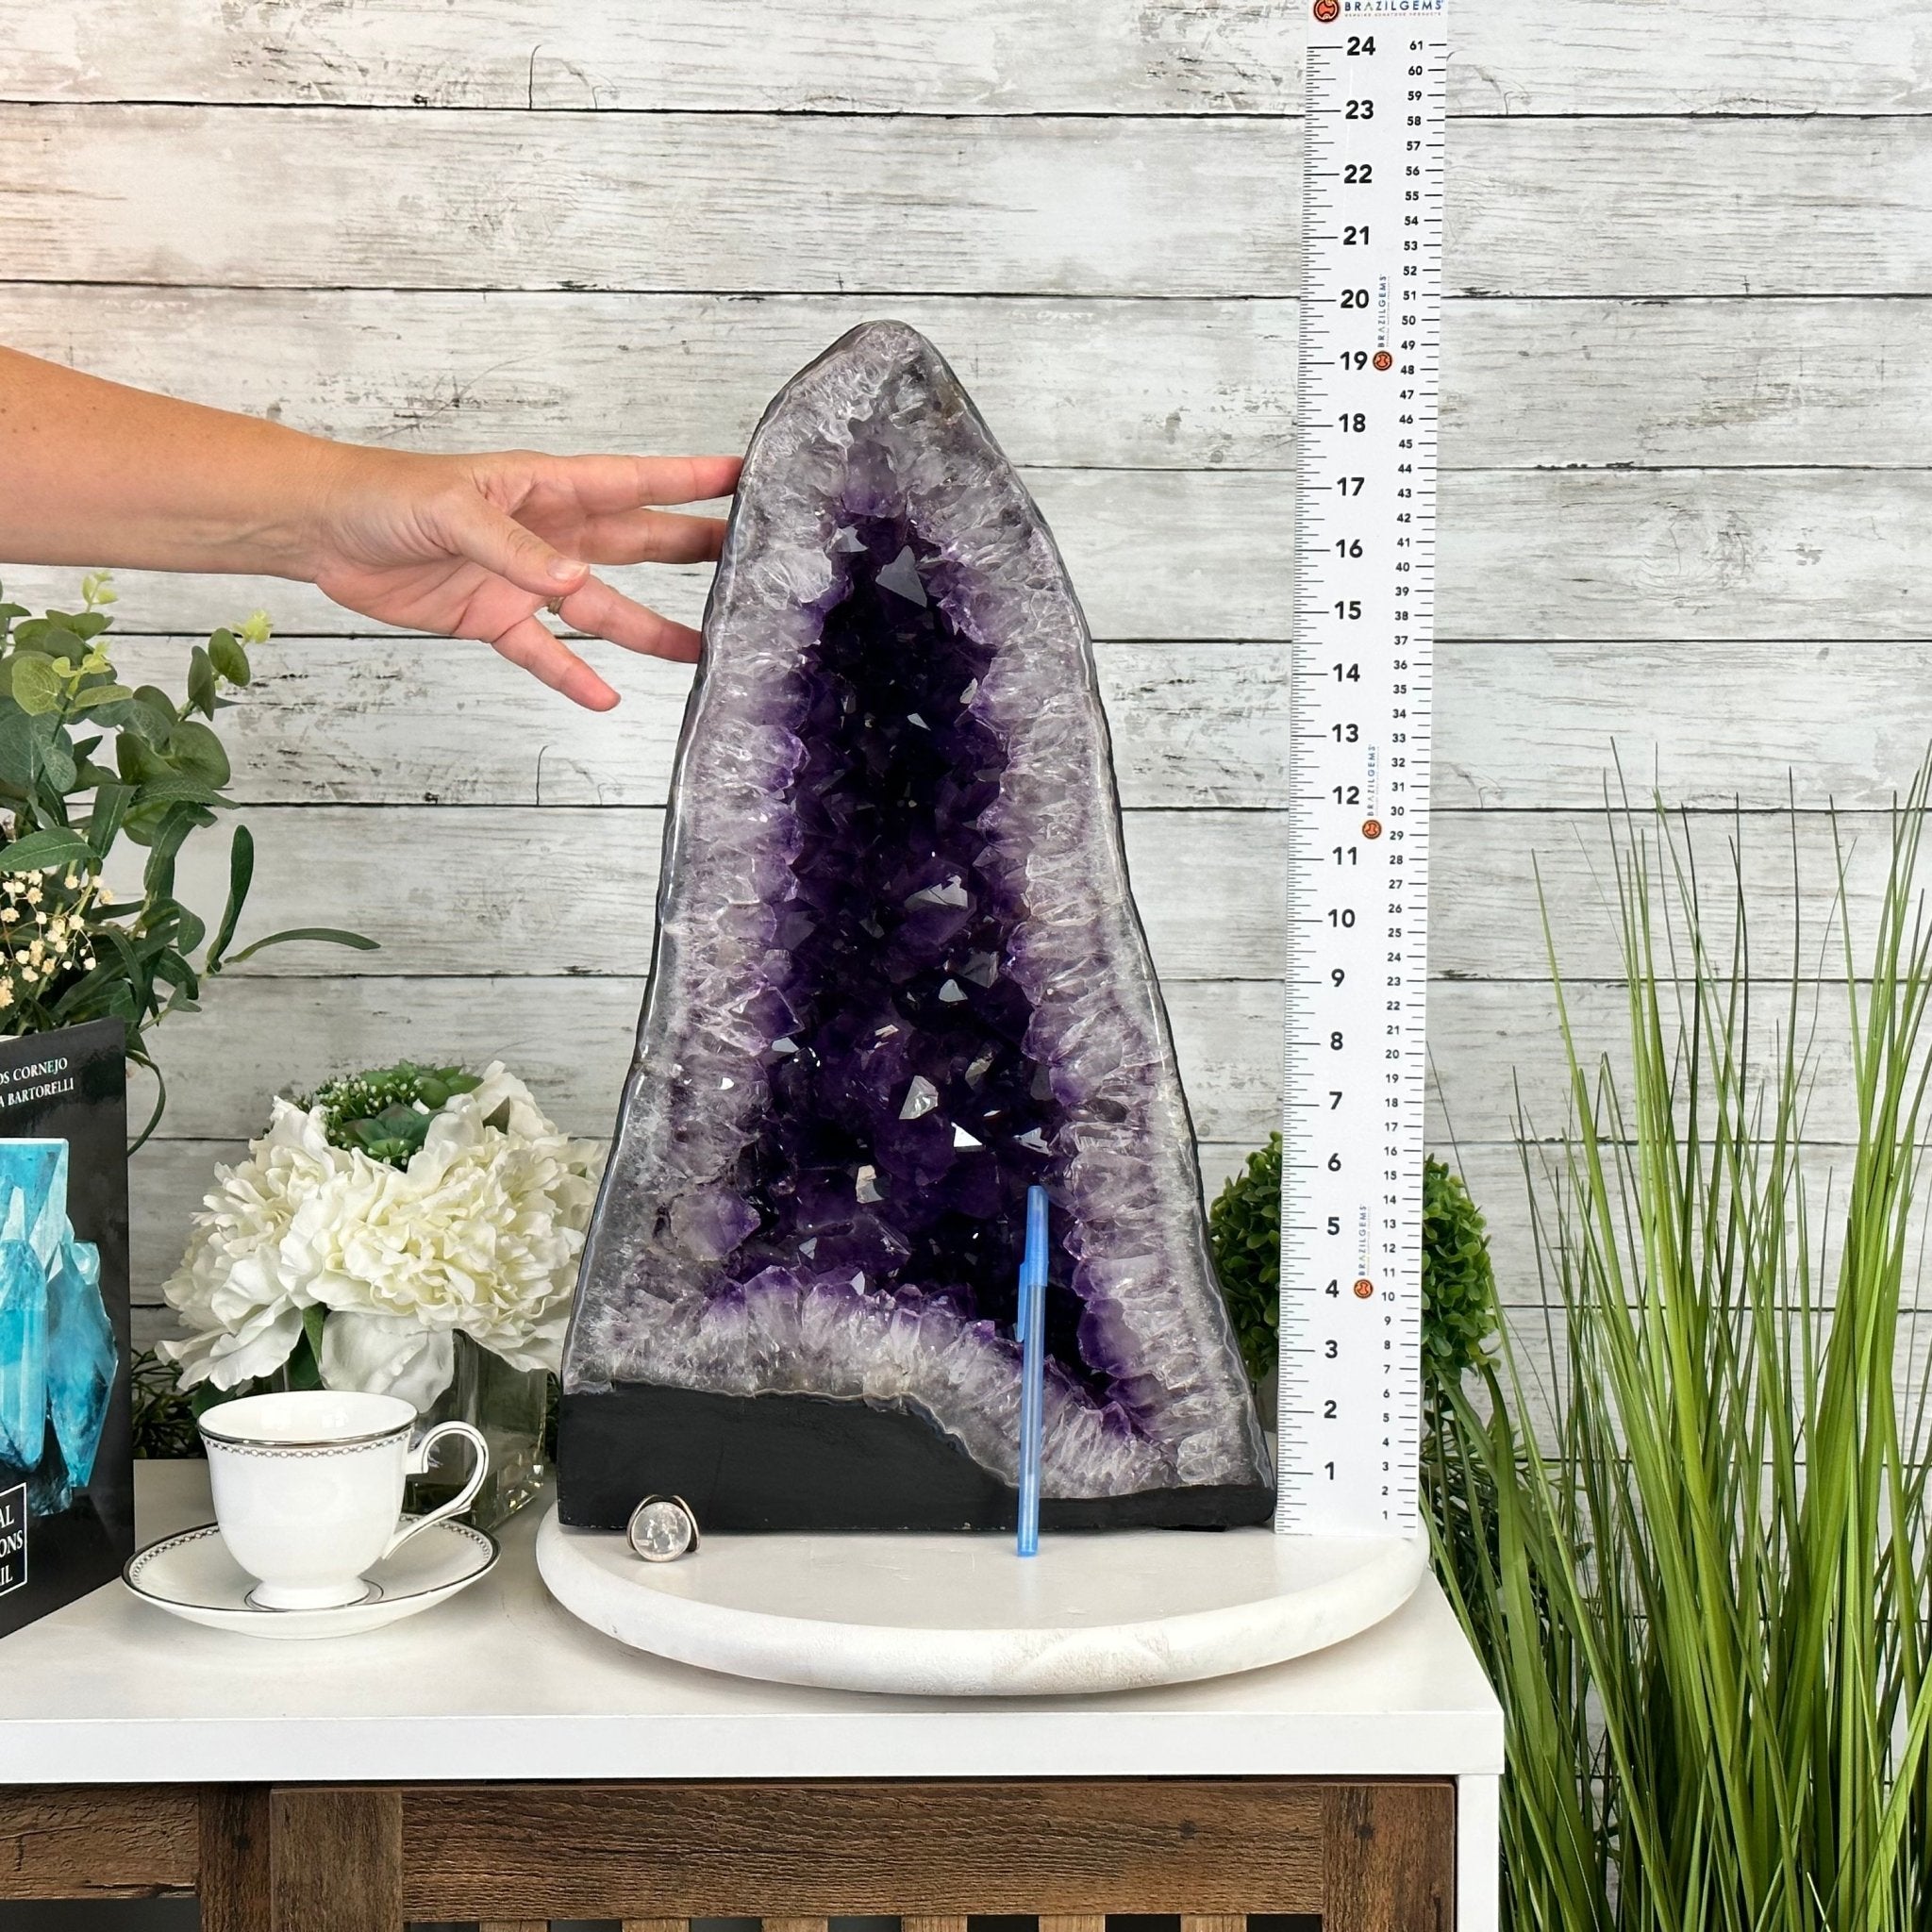 Super Quality Brazilian Amethyst Cathedral, 53.2 lbs & 19.7" Tall, Model #5601-1084 by Brazil Gems - Brazil GemsBrazil GemsSuper Quality Brazilian Amethyst Cathedral, 53.2 lbs & 19.7" Tall, Model #5601-1084 by Brazil GemsCathedrals5601-1084